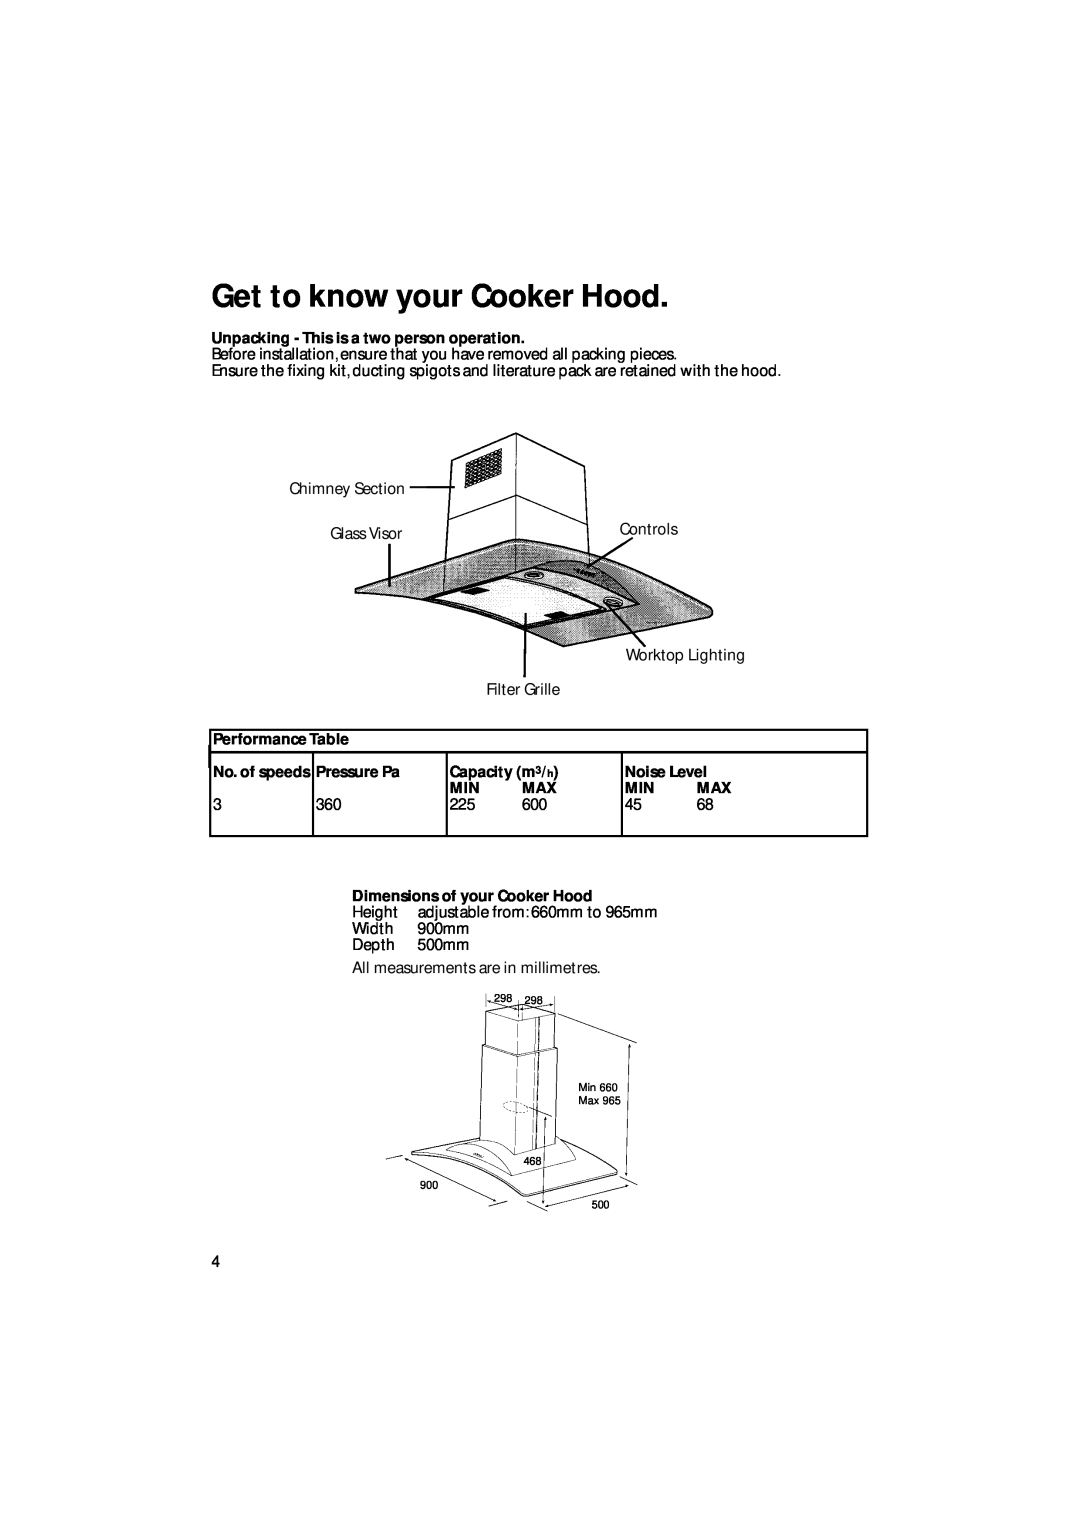 Creda CRC95 manual Get to know your Cooker Hood, Unpacking - This is a two person operation, Performance Table, Pressure Pa 